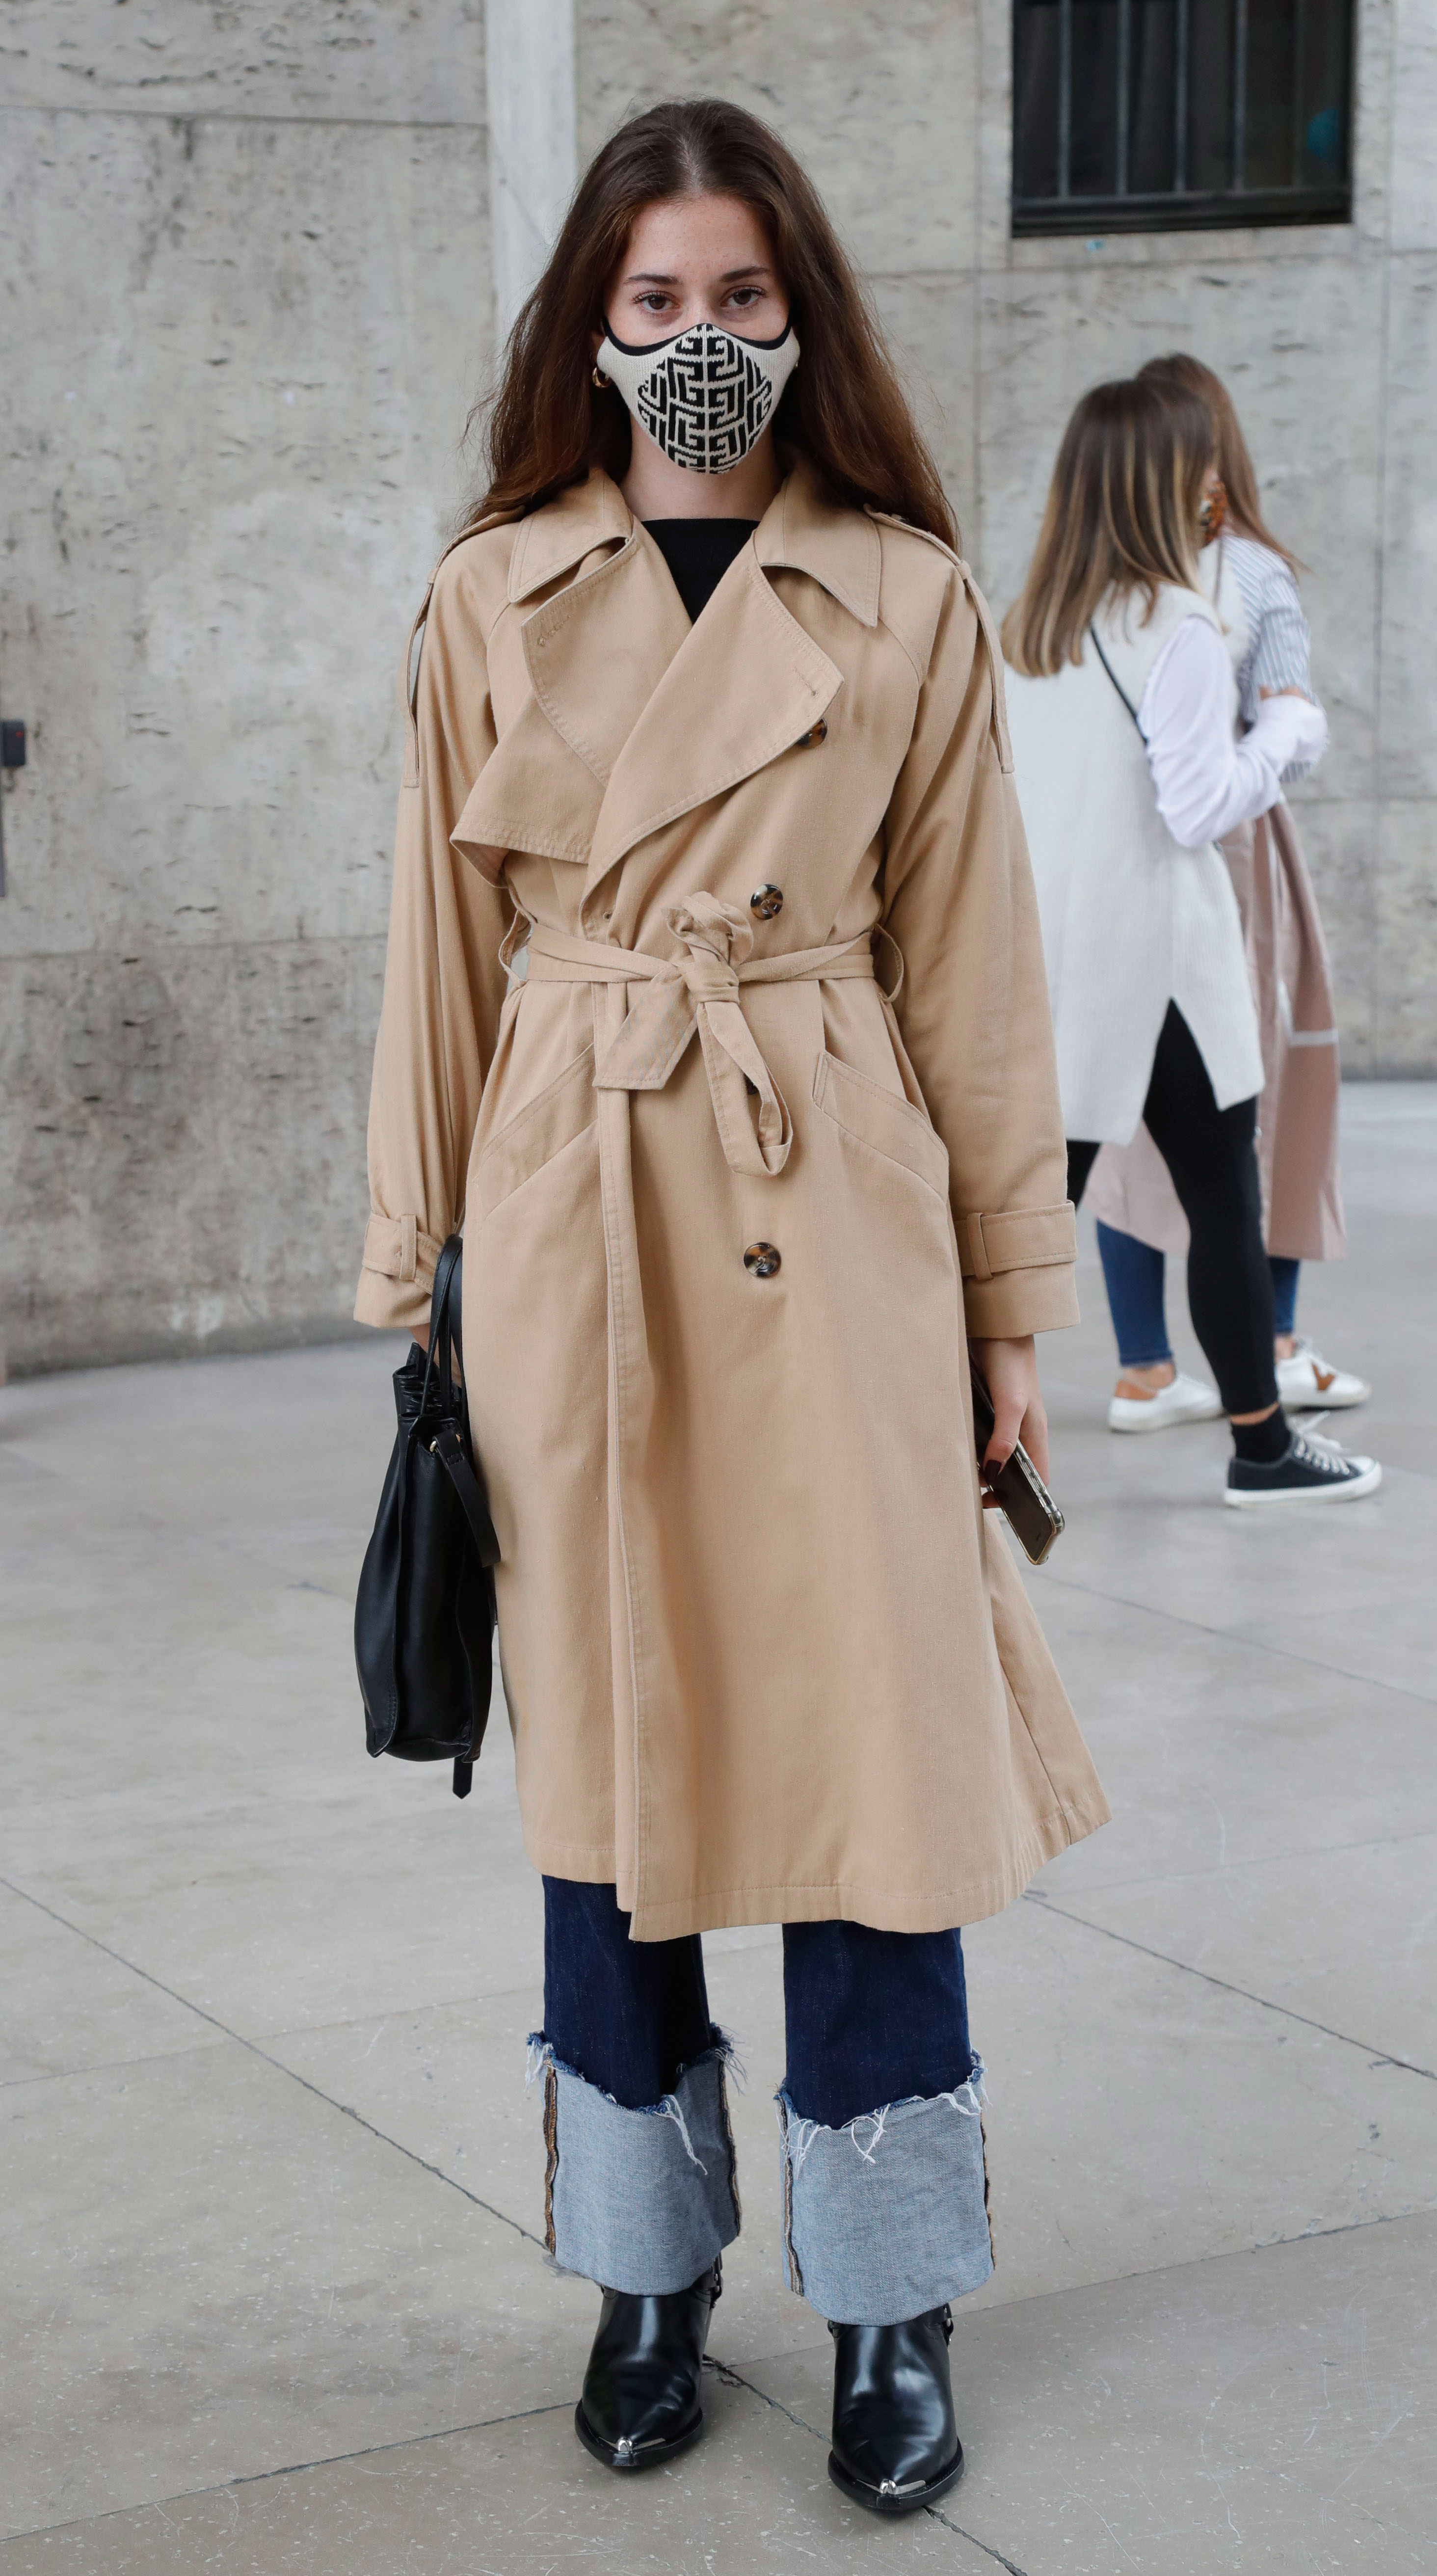 Paris Fashion Week Street Style: Woman wears a trench coat, mask, jeans, and black boots.